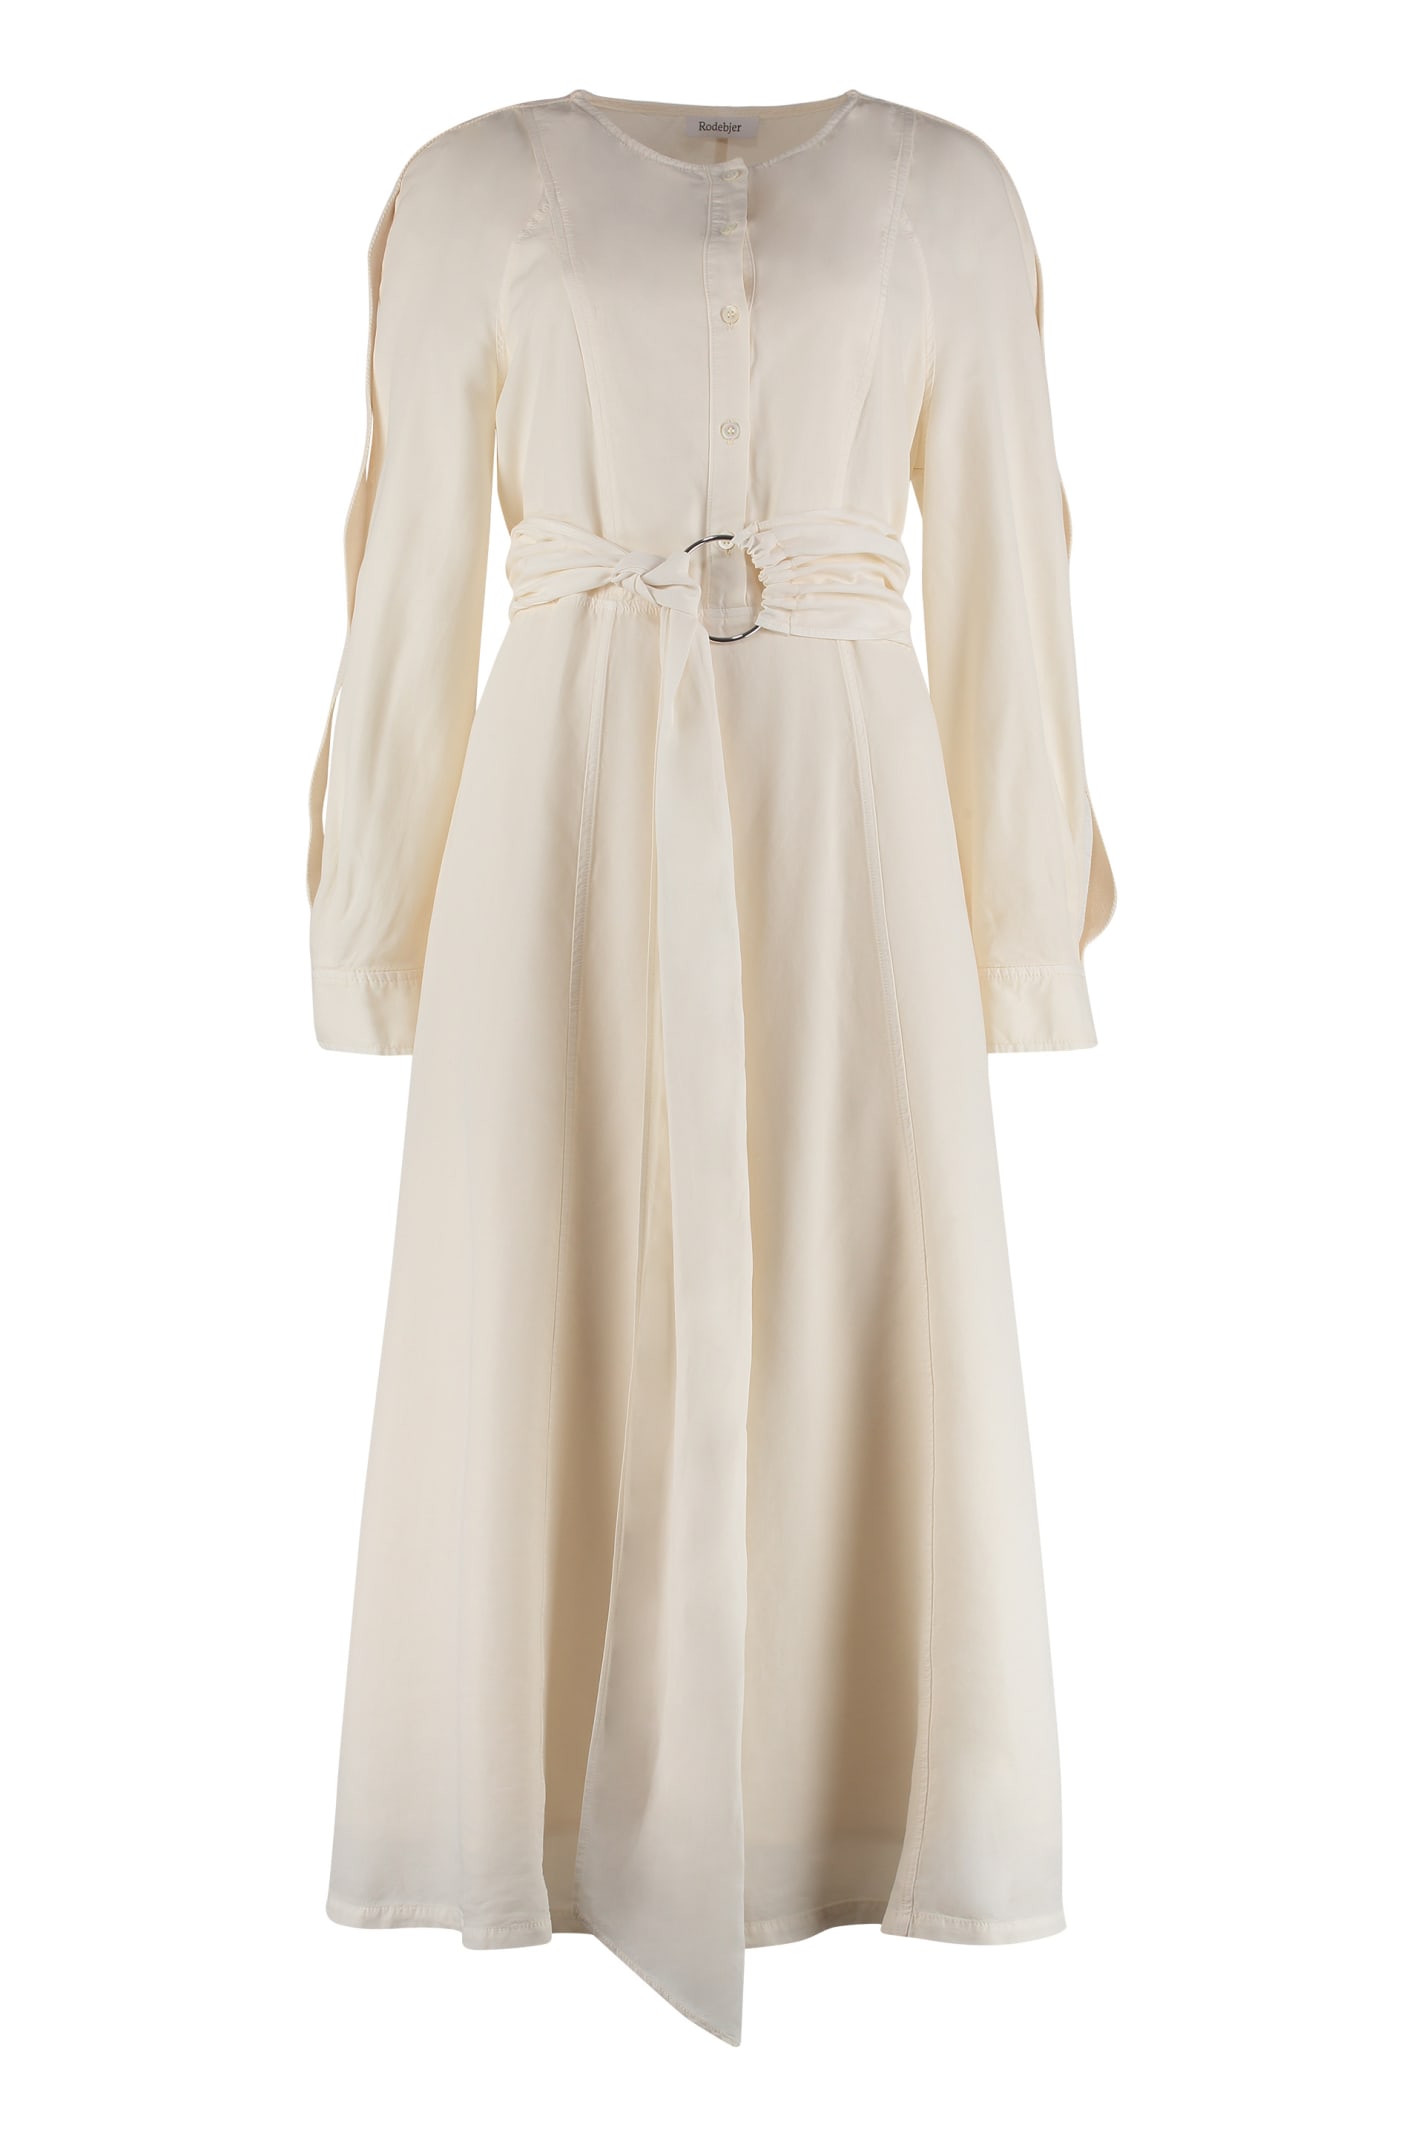 RODEBJER BELTED SHIRTDRESS